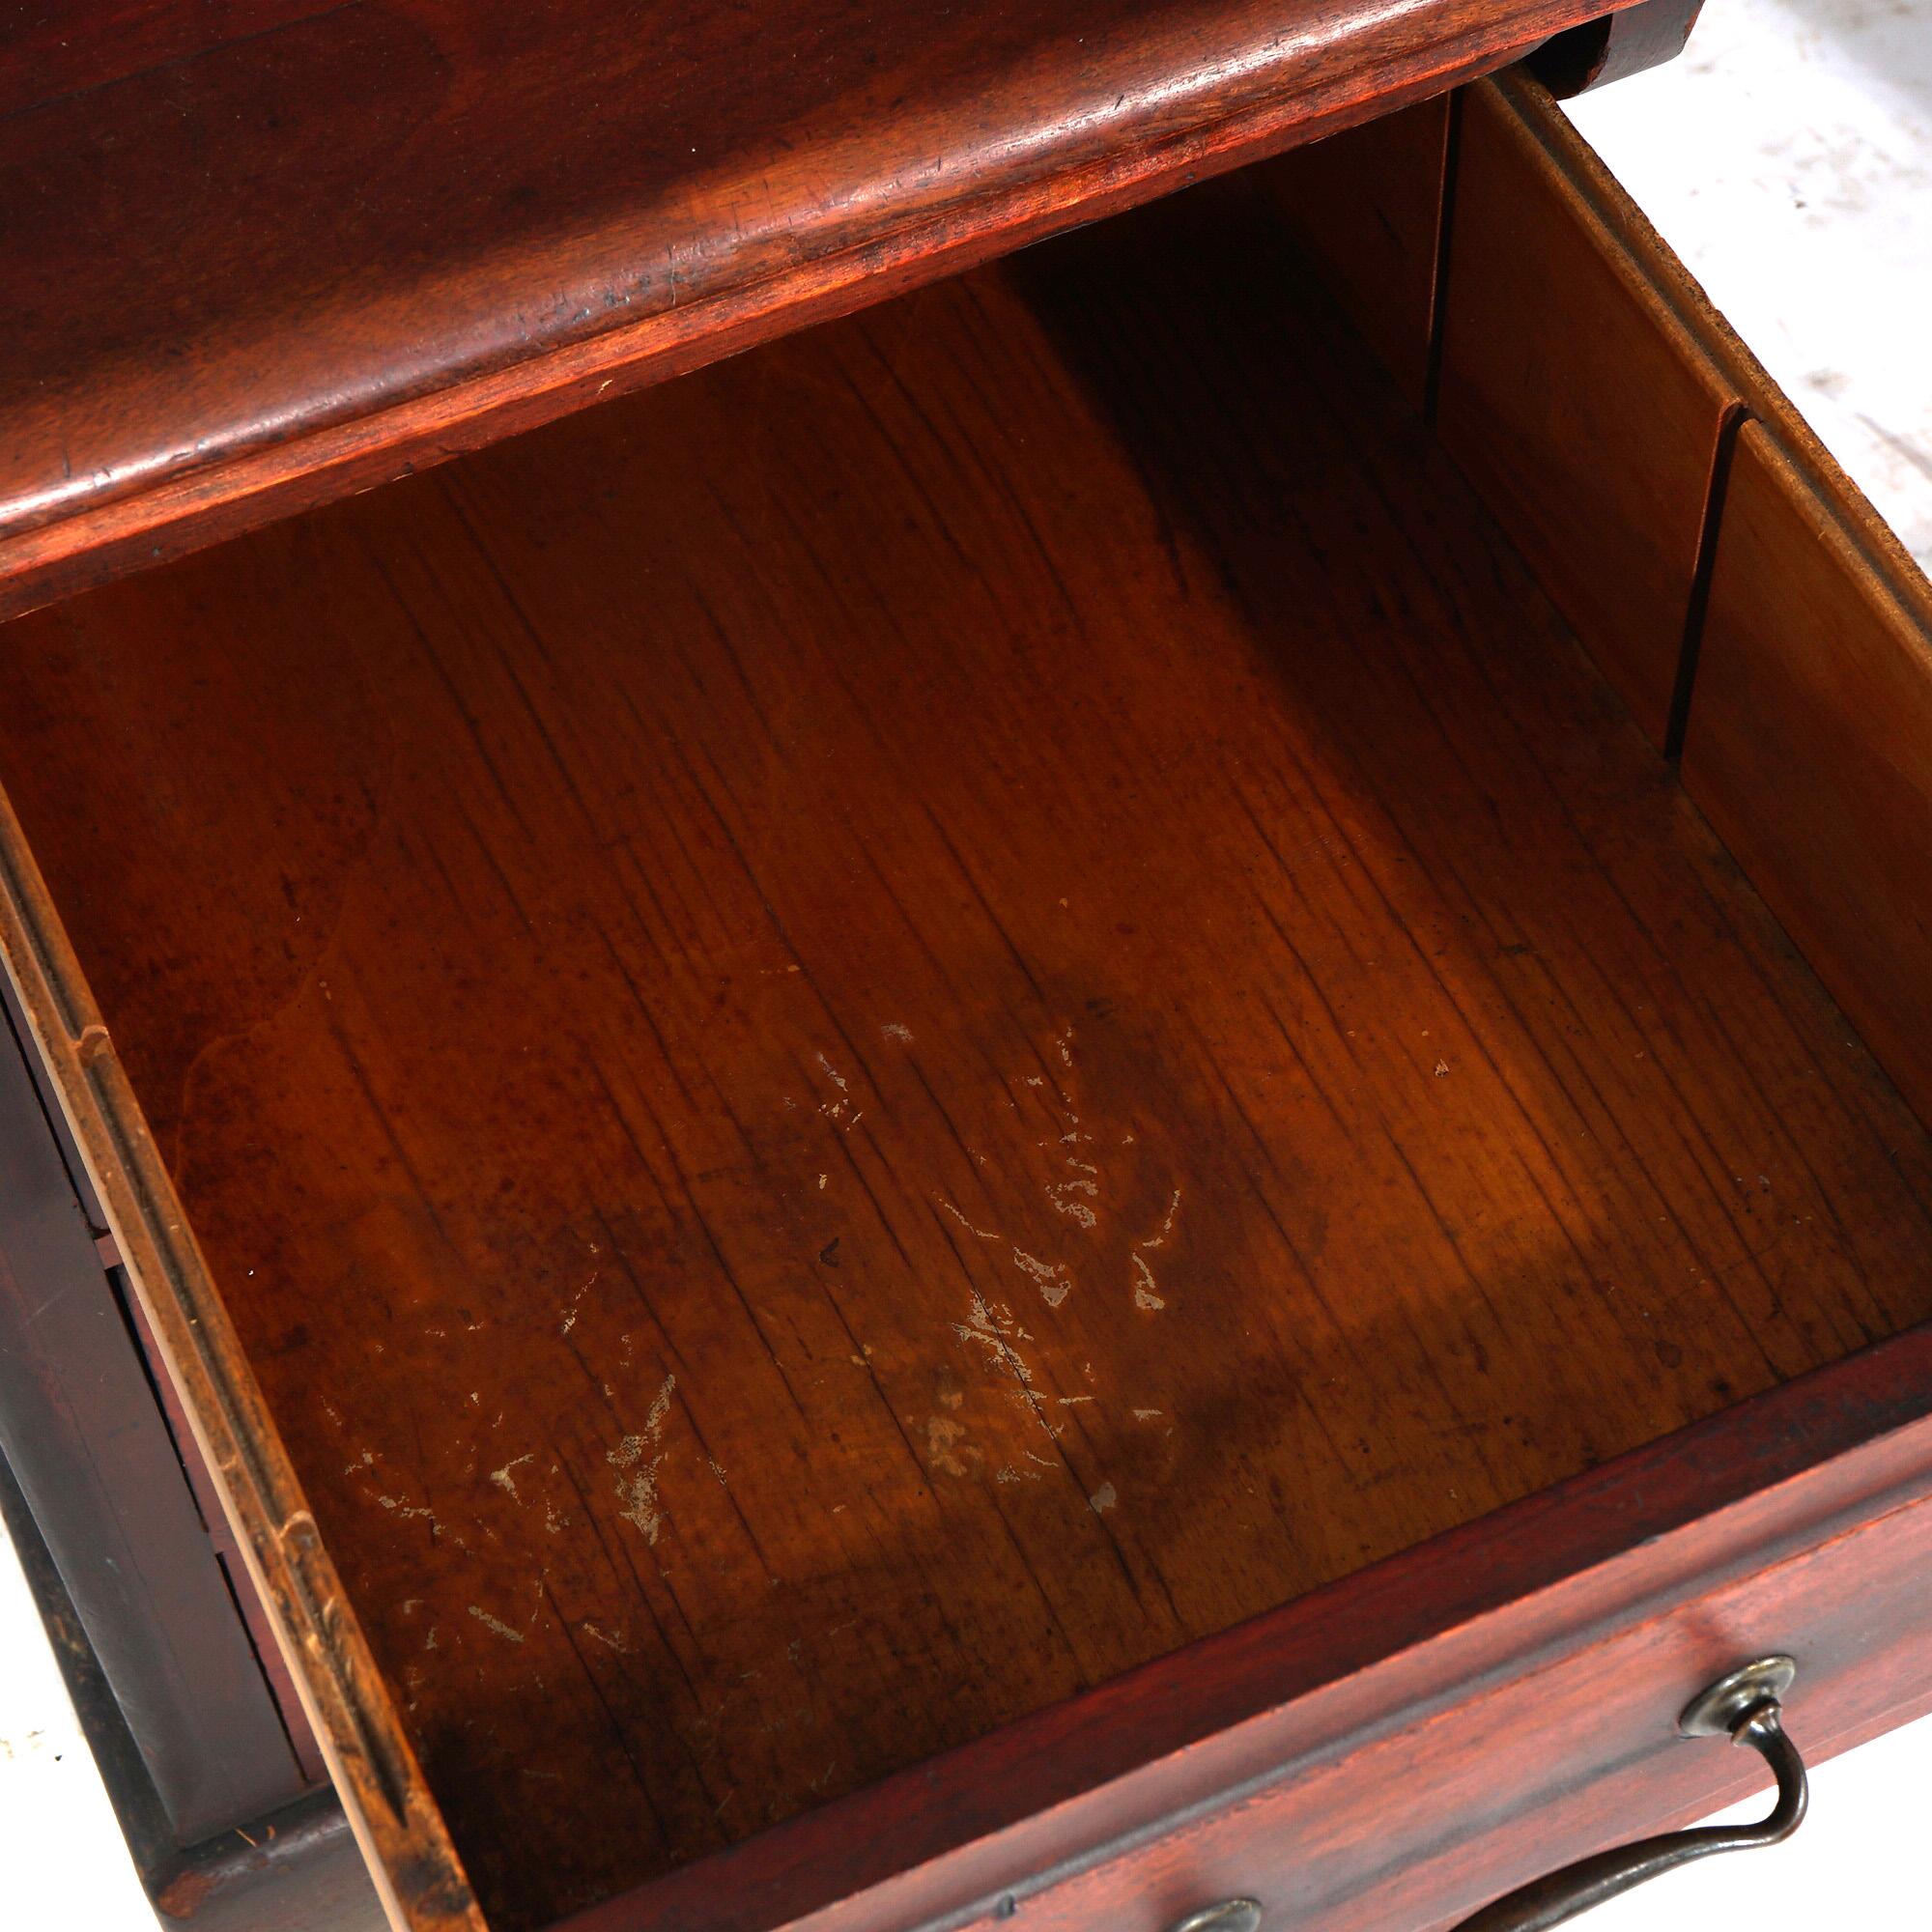 Antique Mahogany S-Roll Top Desk with Full Interior by Gunn, c1900 For Sale 1